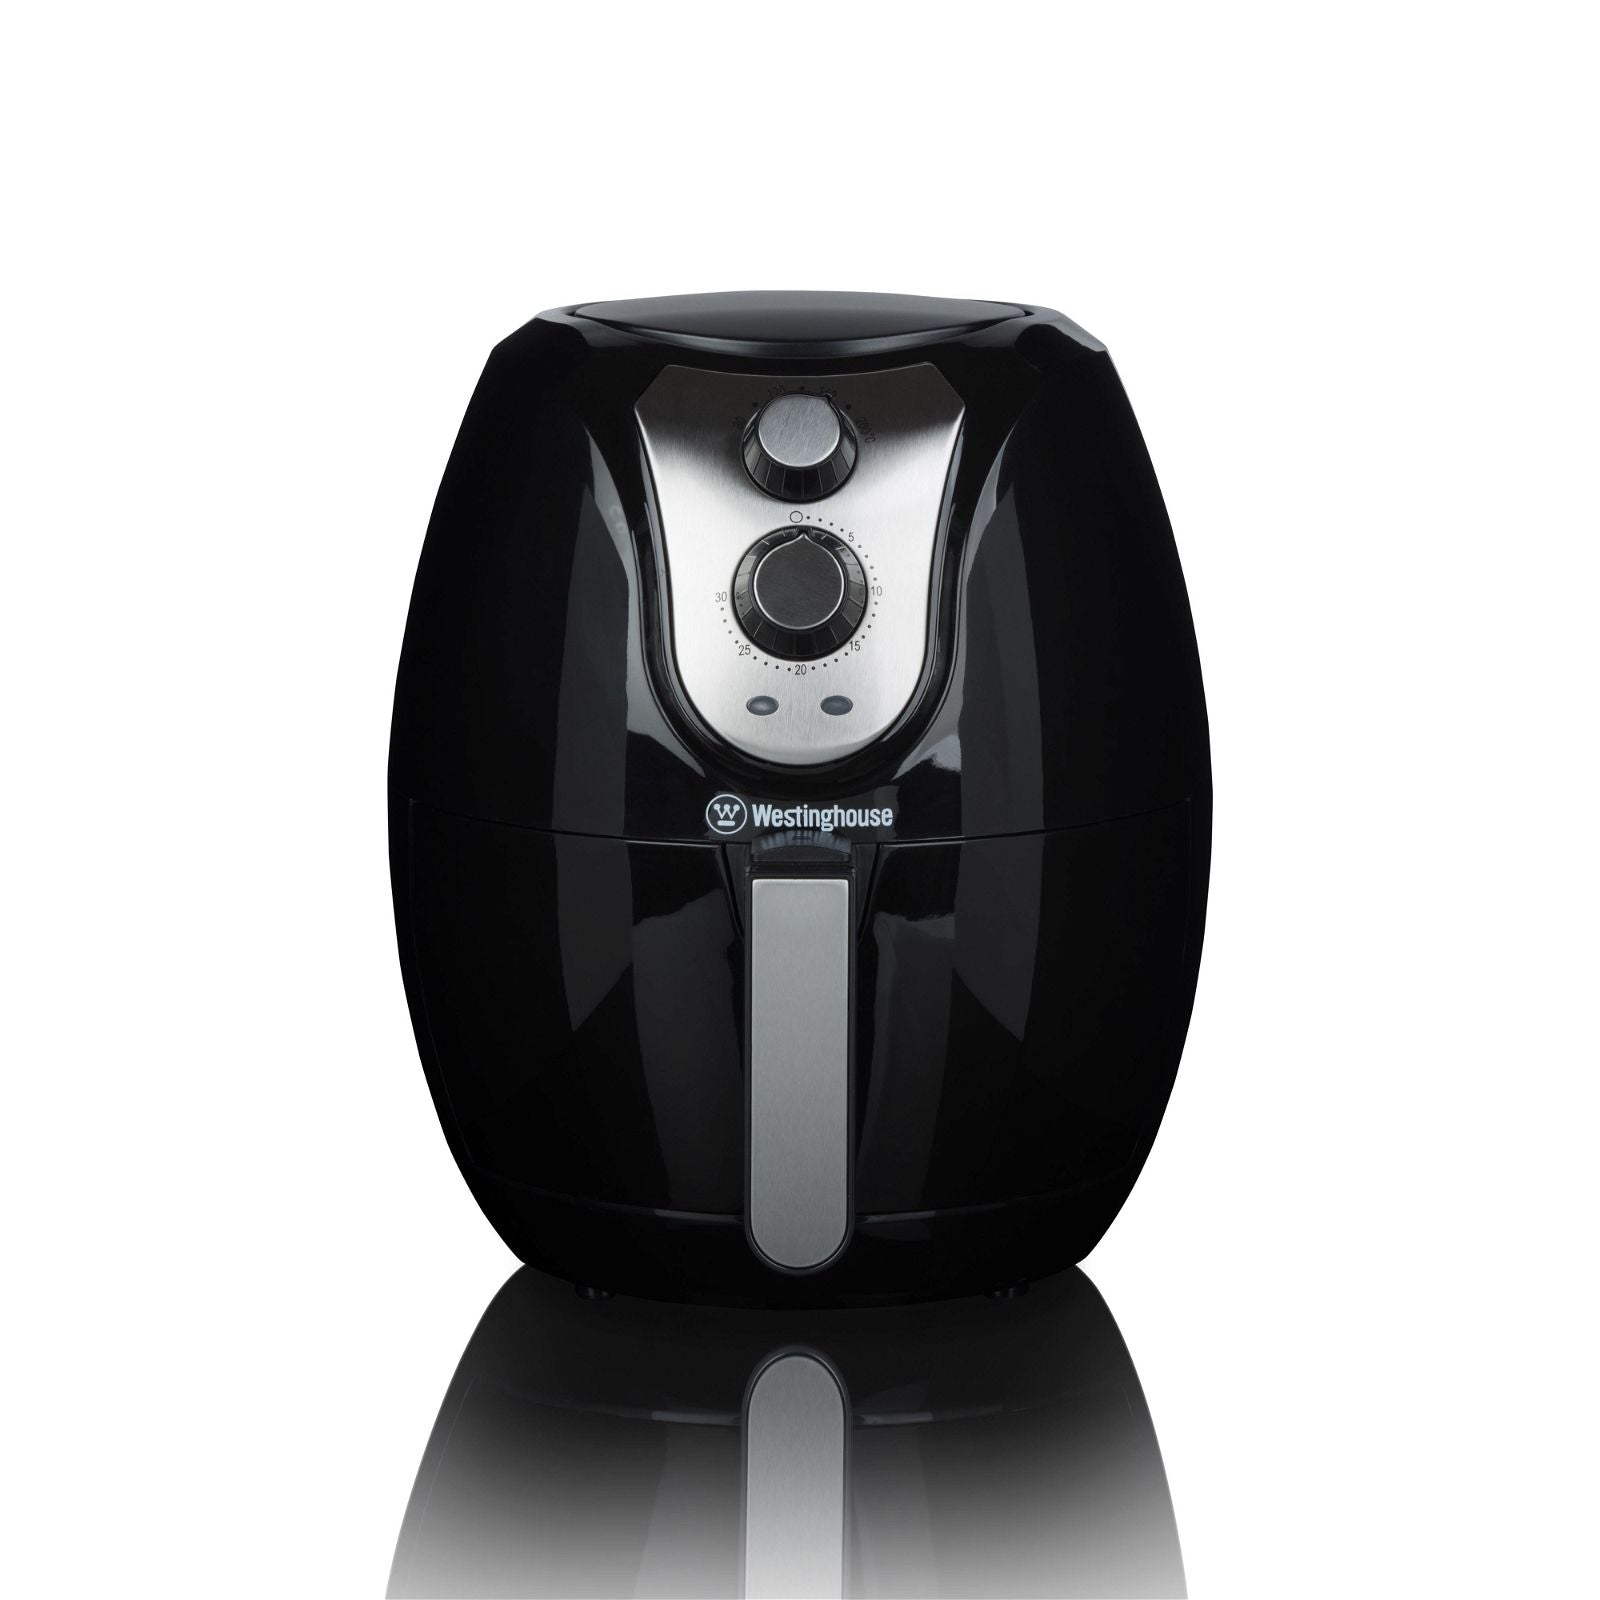 Westinghouse Air Fryer 1400W 3.2L-#product_category#- Distributed by:  under license